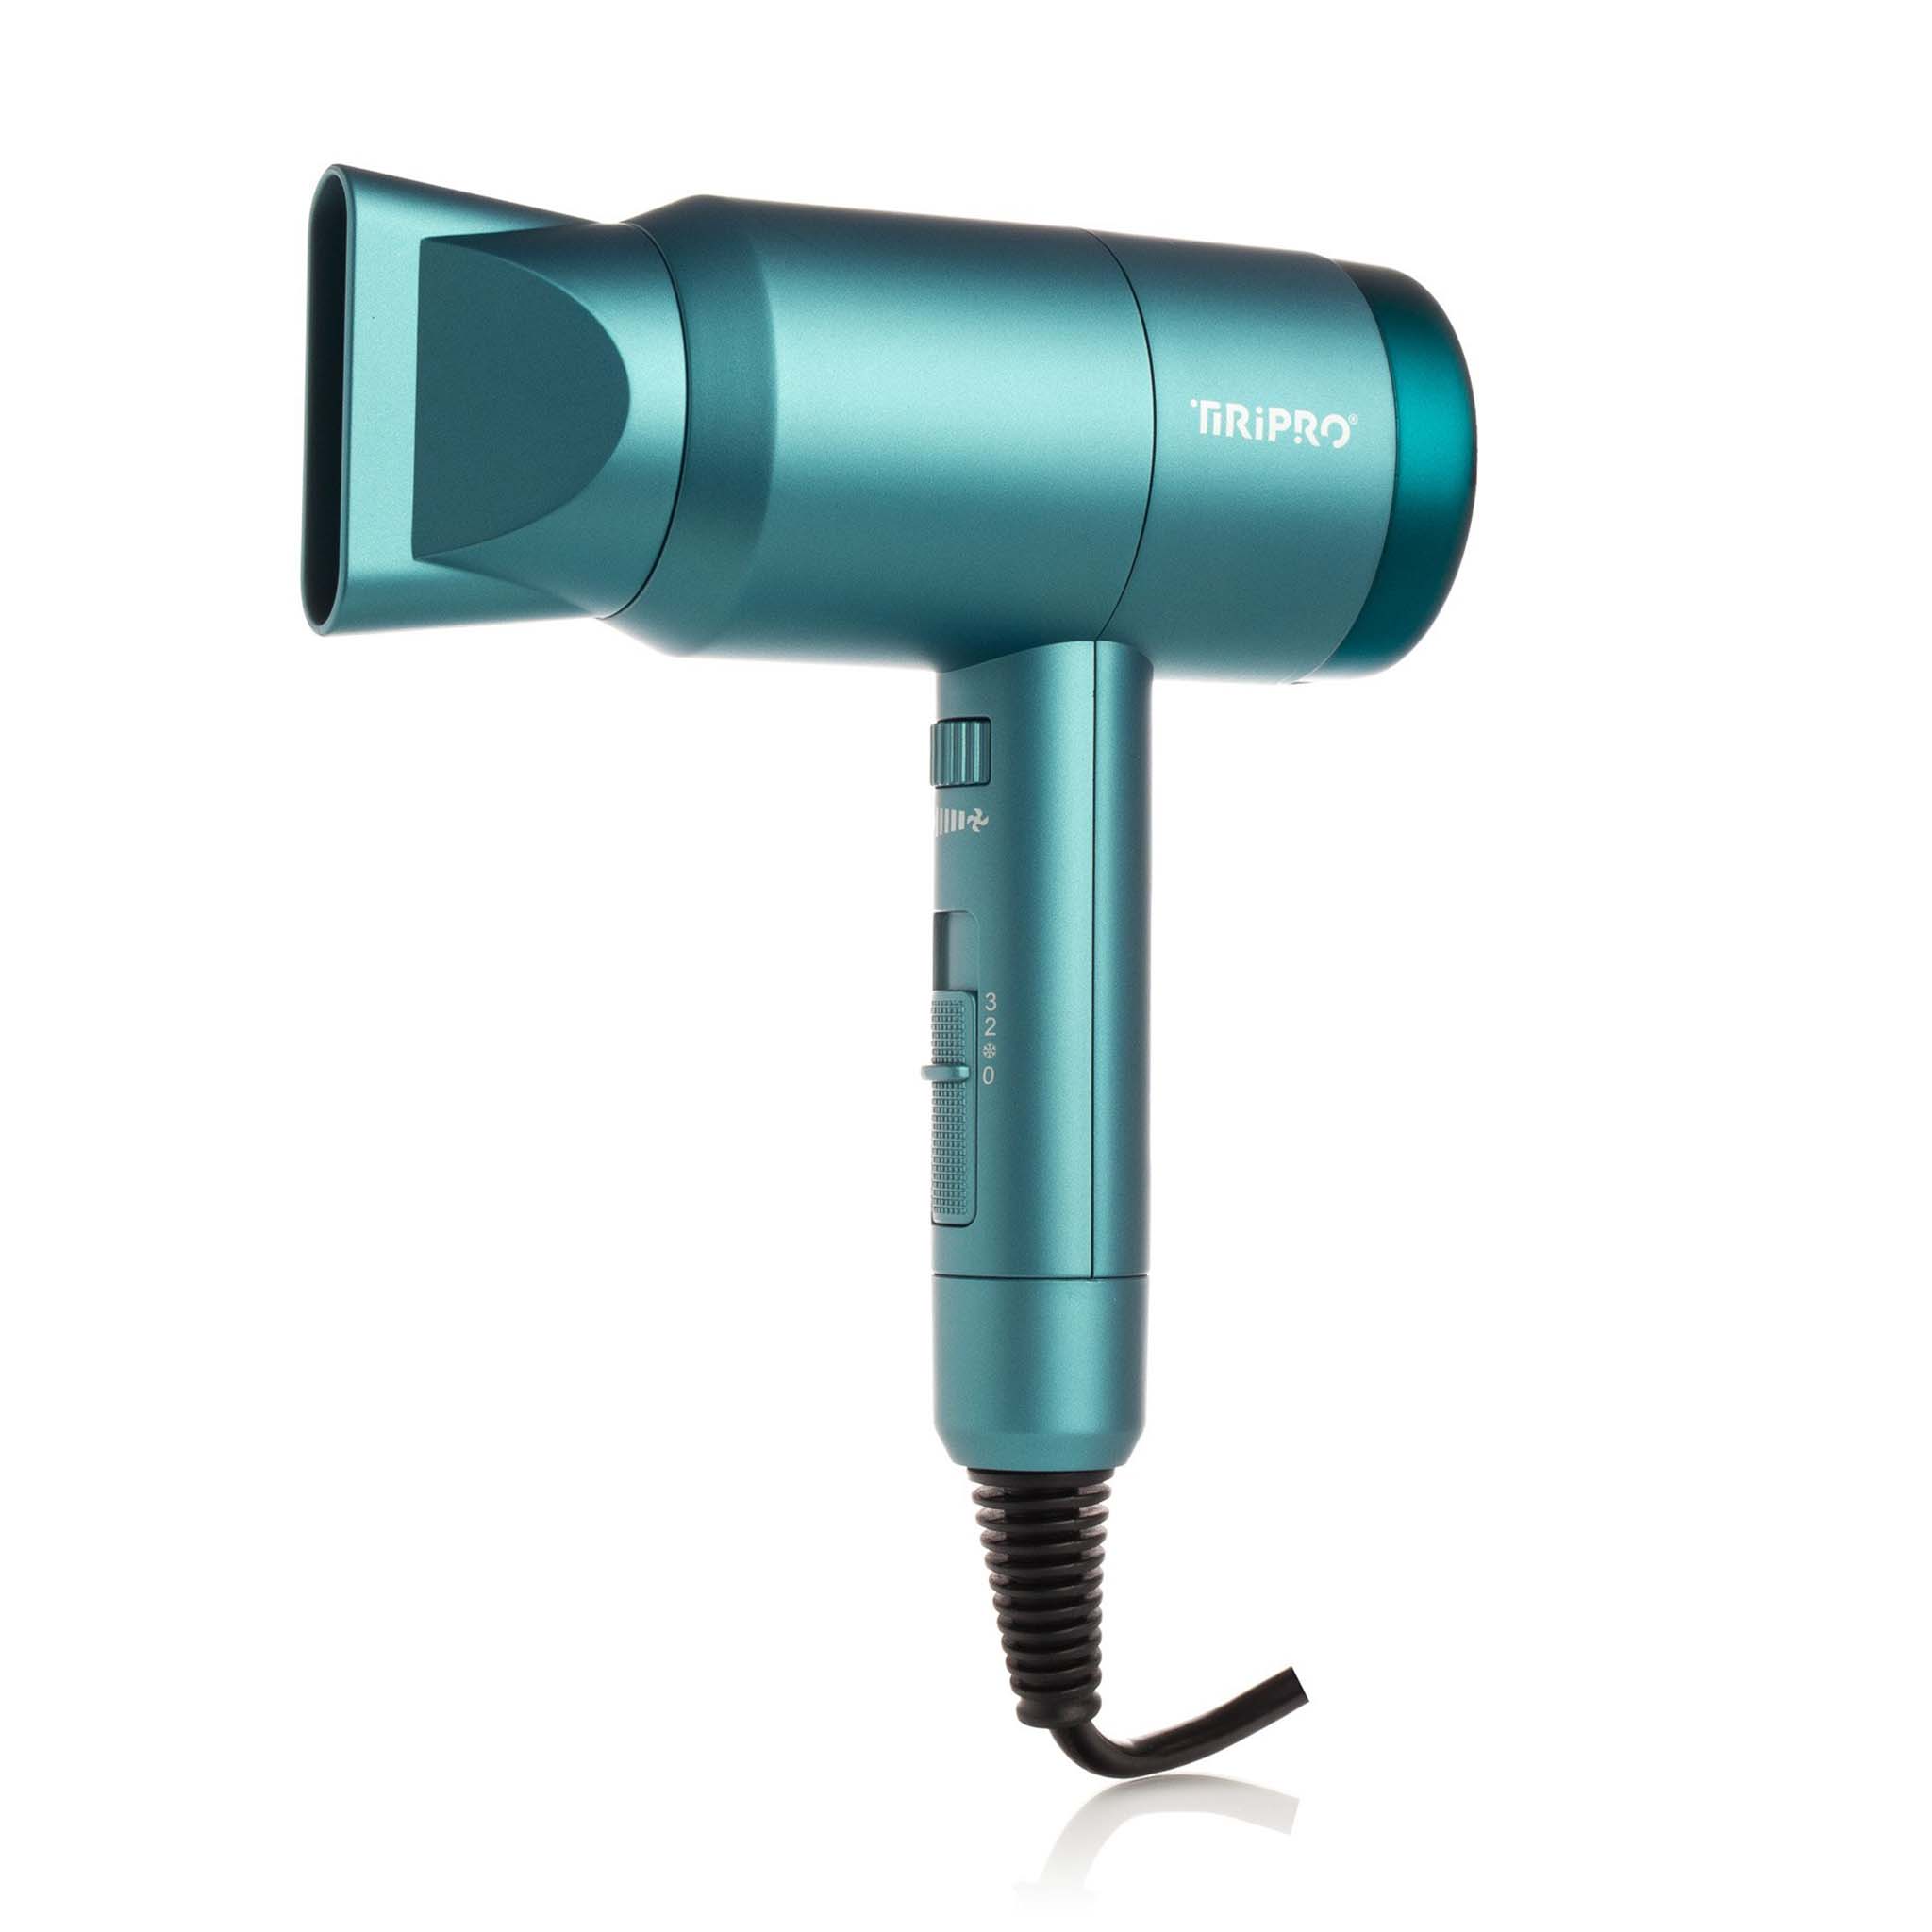 Prisma Pro Dryer with Adjustable Airflow Technology